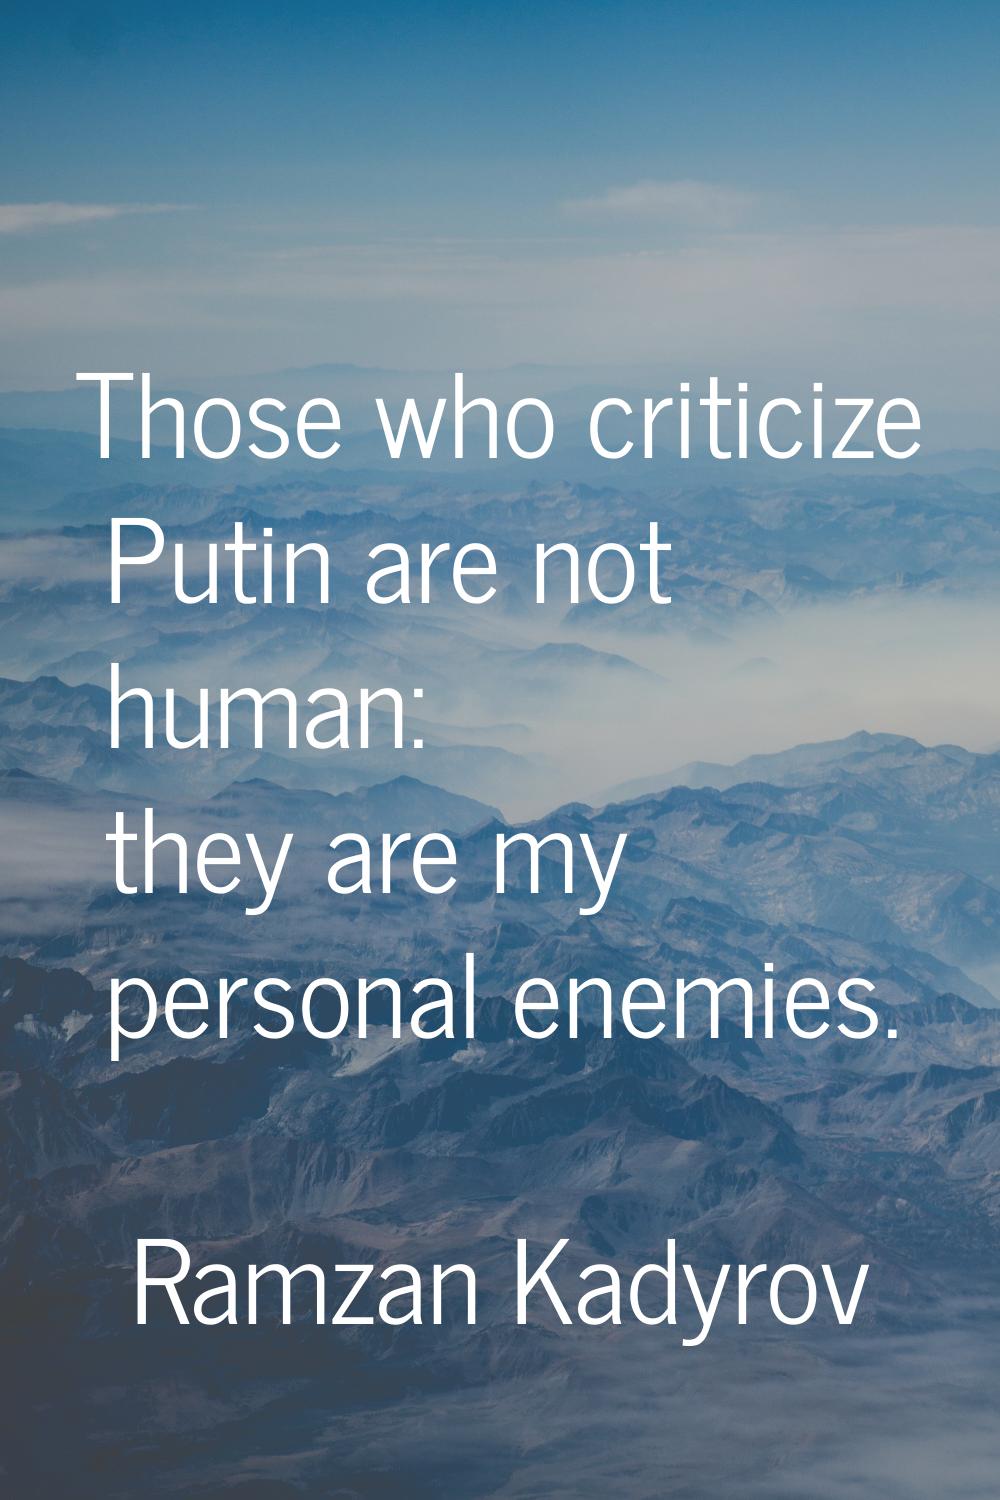 Those who criticize Putin are not human: they are my personal enemies.